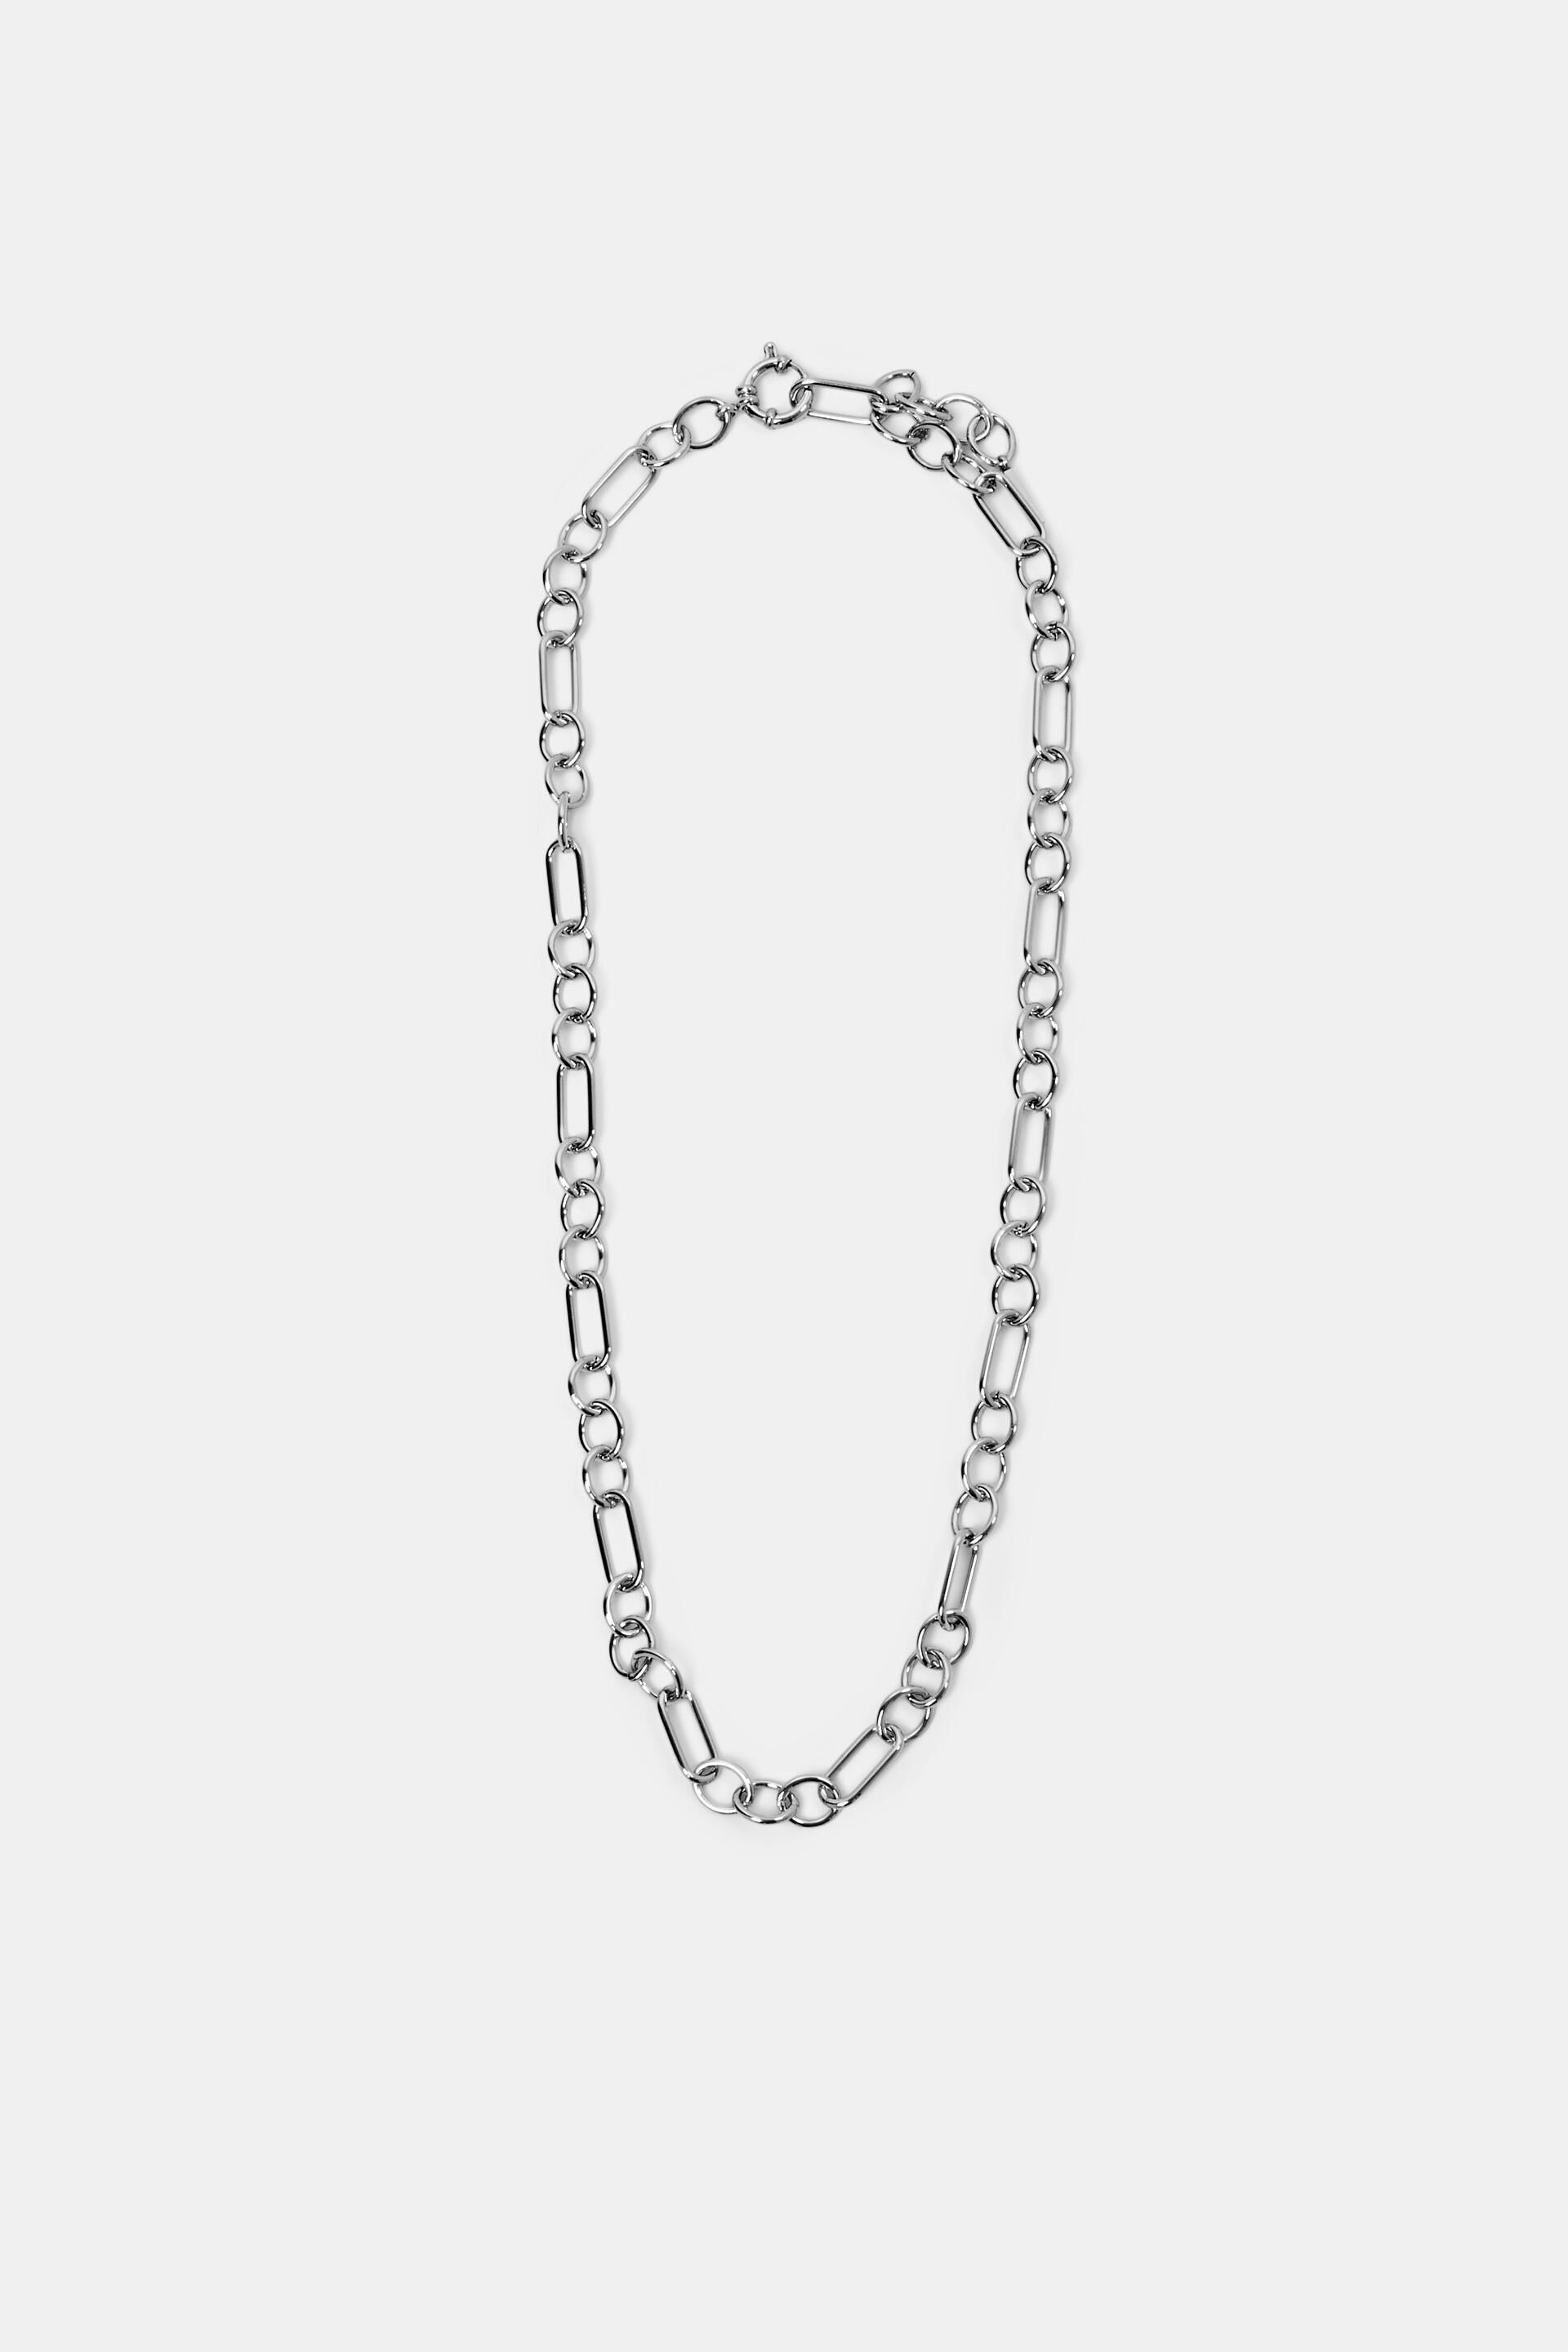 Esprit Chain steel necklace, stainless